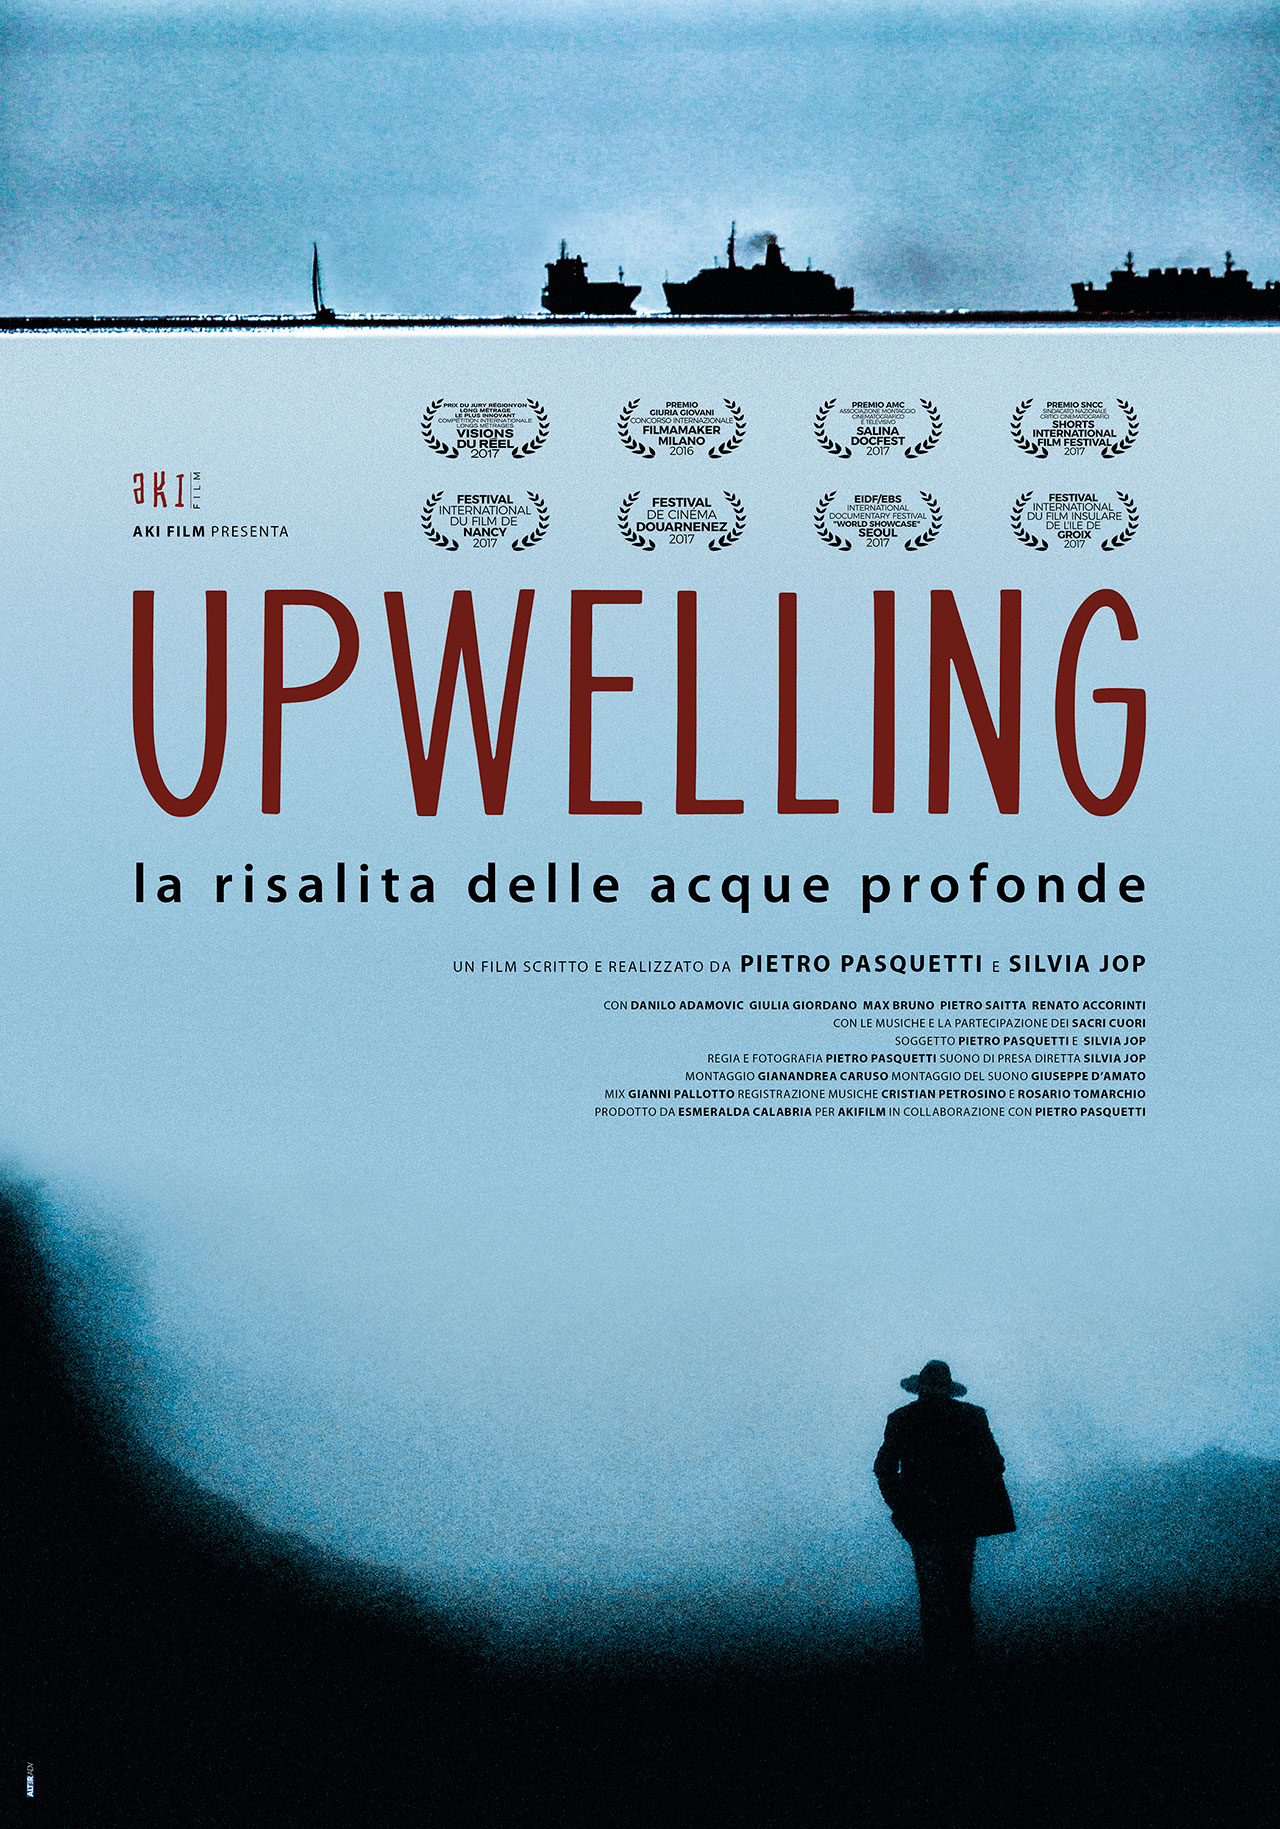 Upwelling_Poster_01_2018